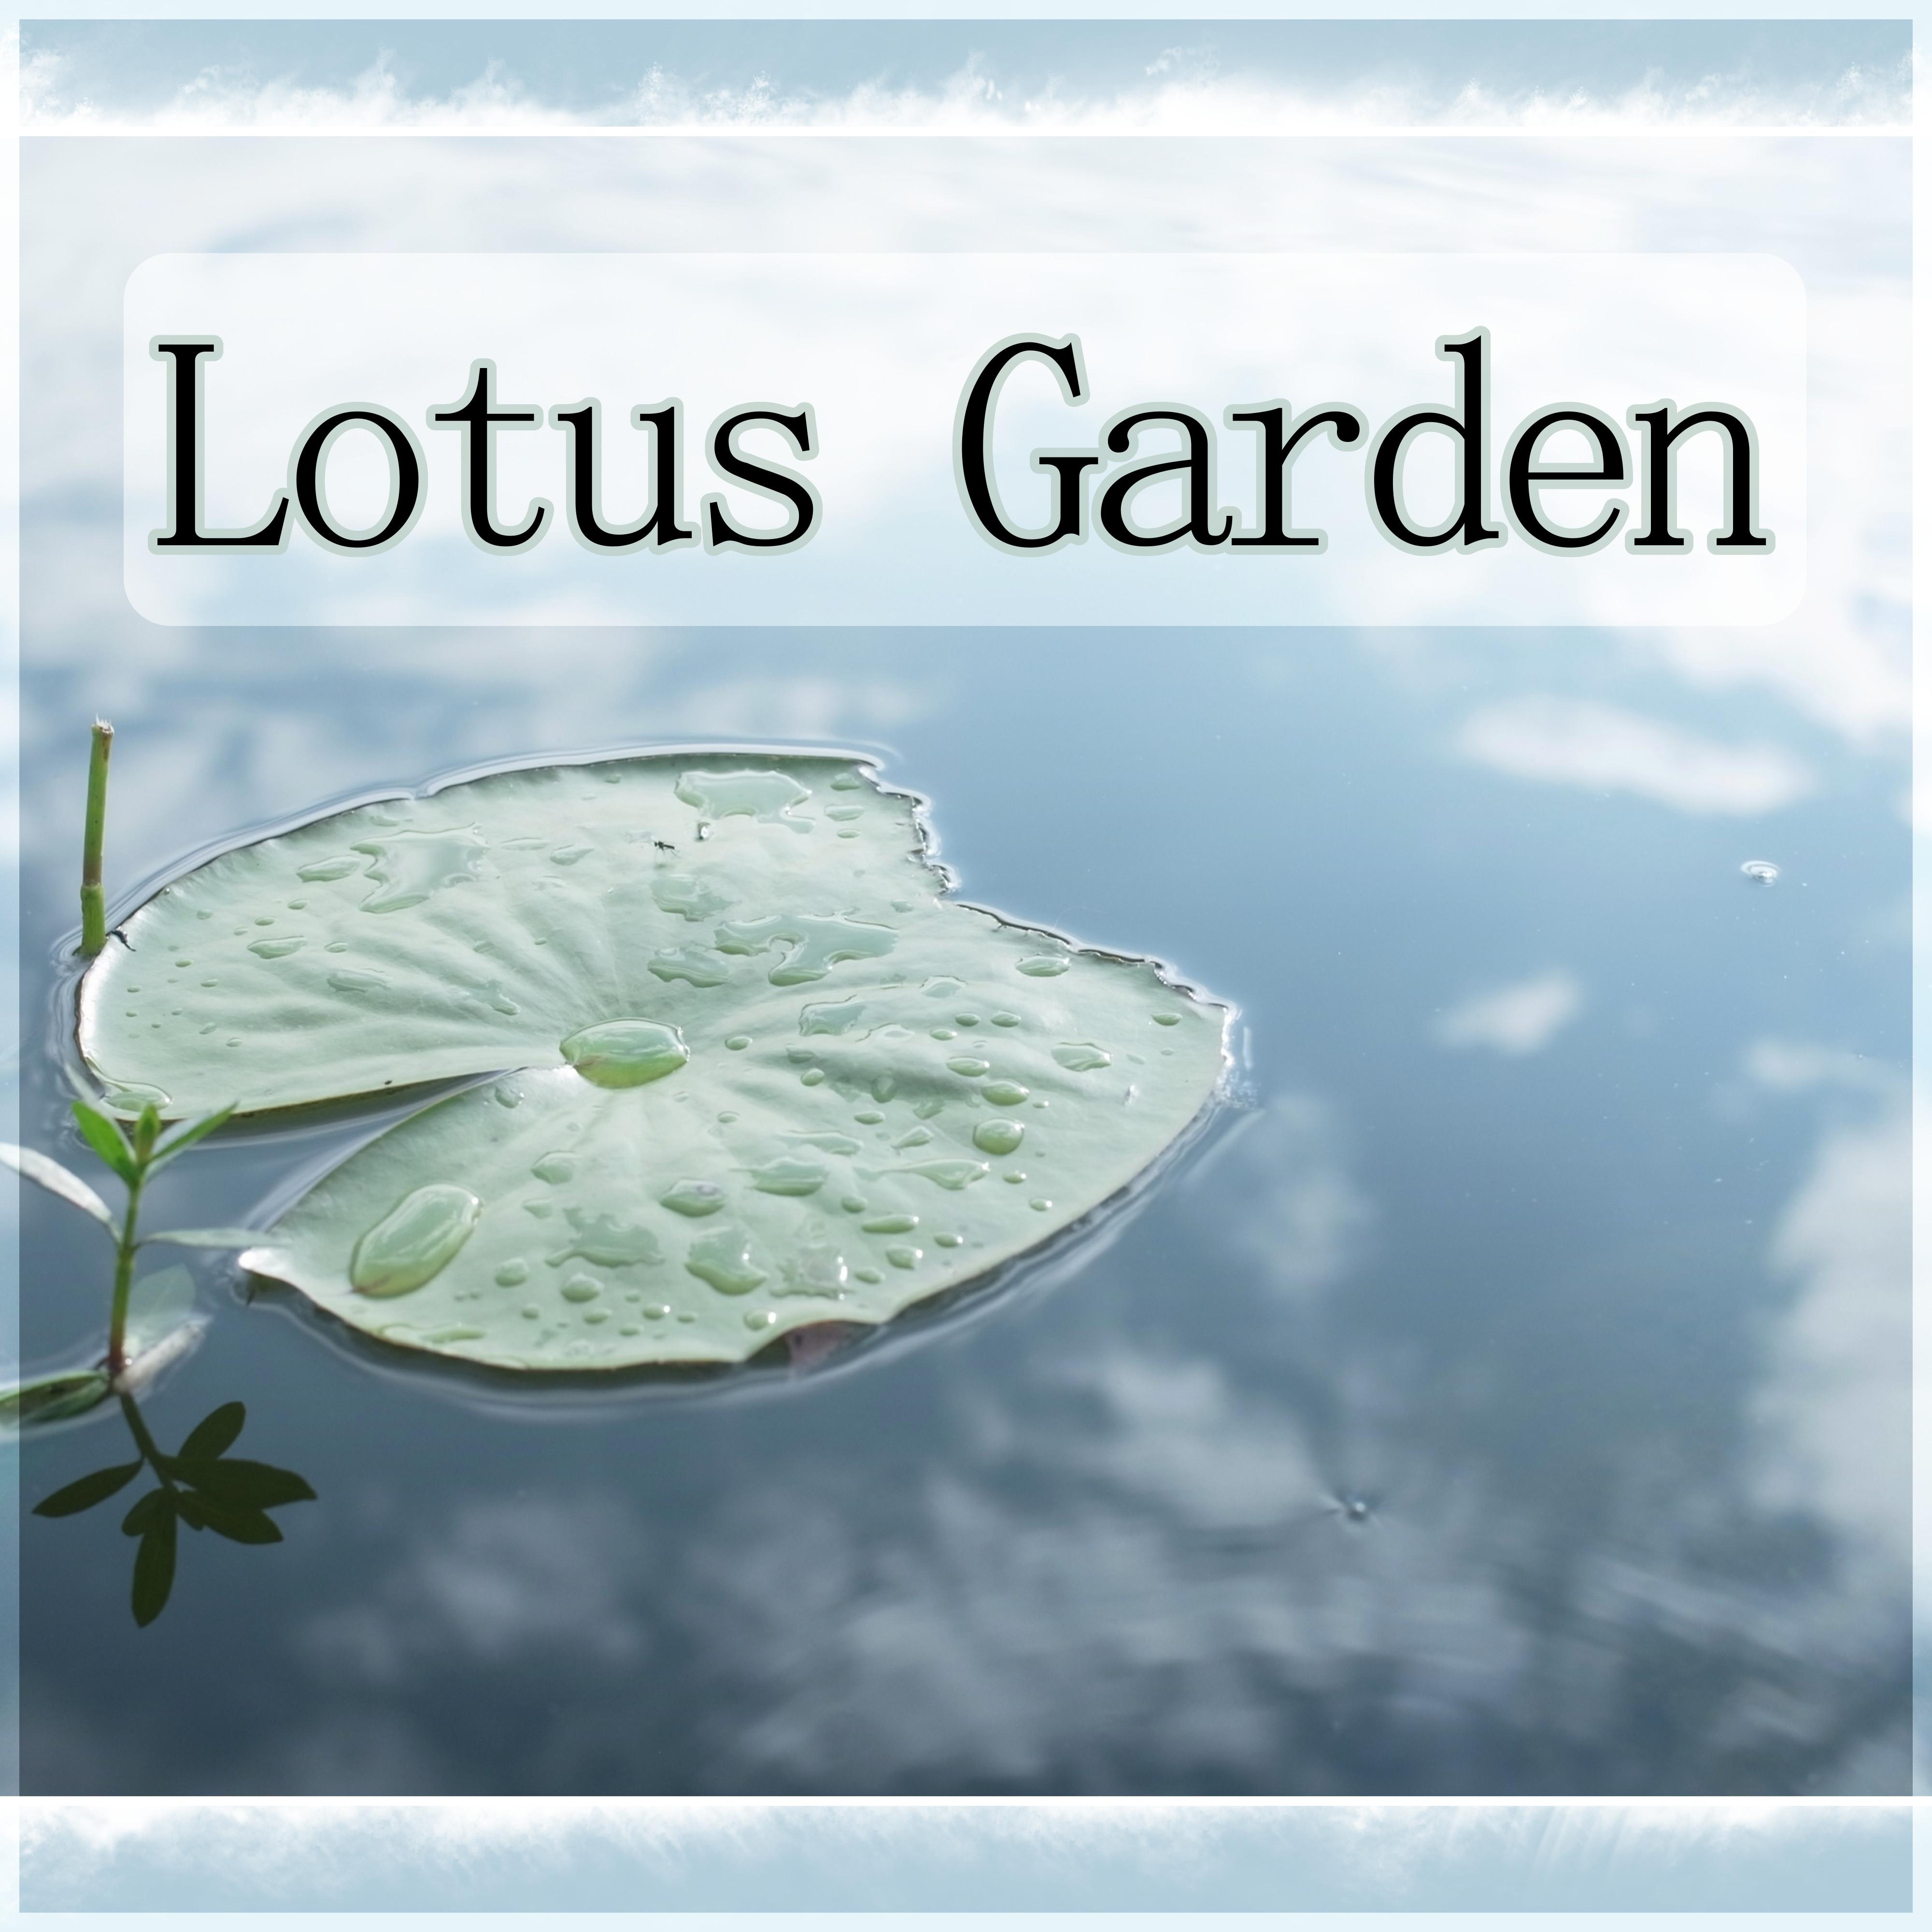 Lotus Garden - Ambient Music for Therapy, Serenity Spa, Healing Massage, Meditation & Relaxation, Music and Pure Nature Sounds for Stress Relief